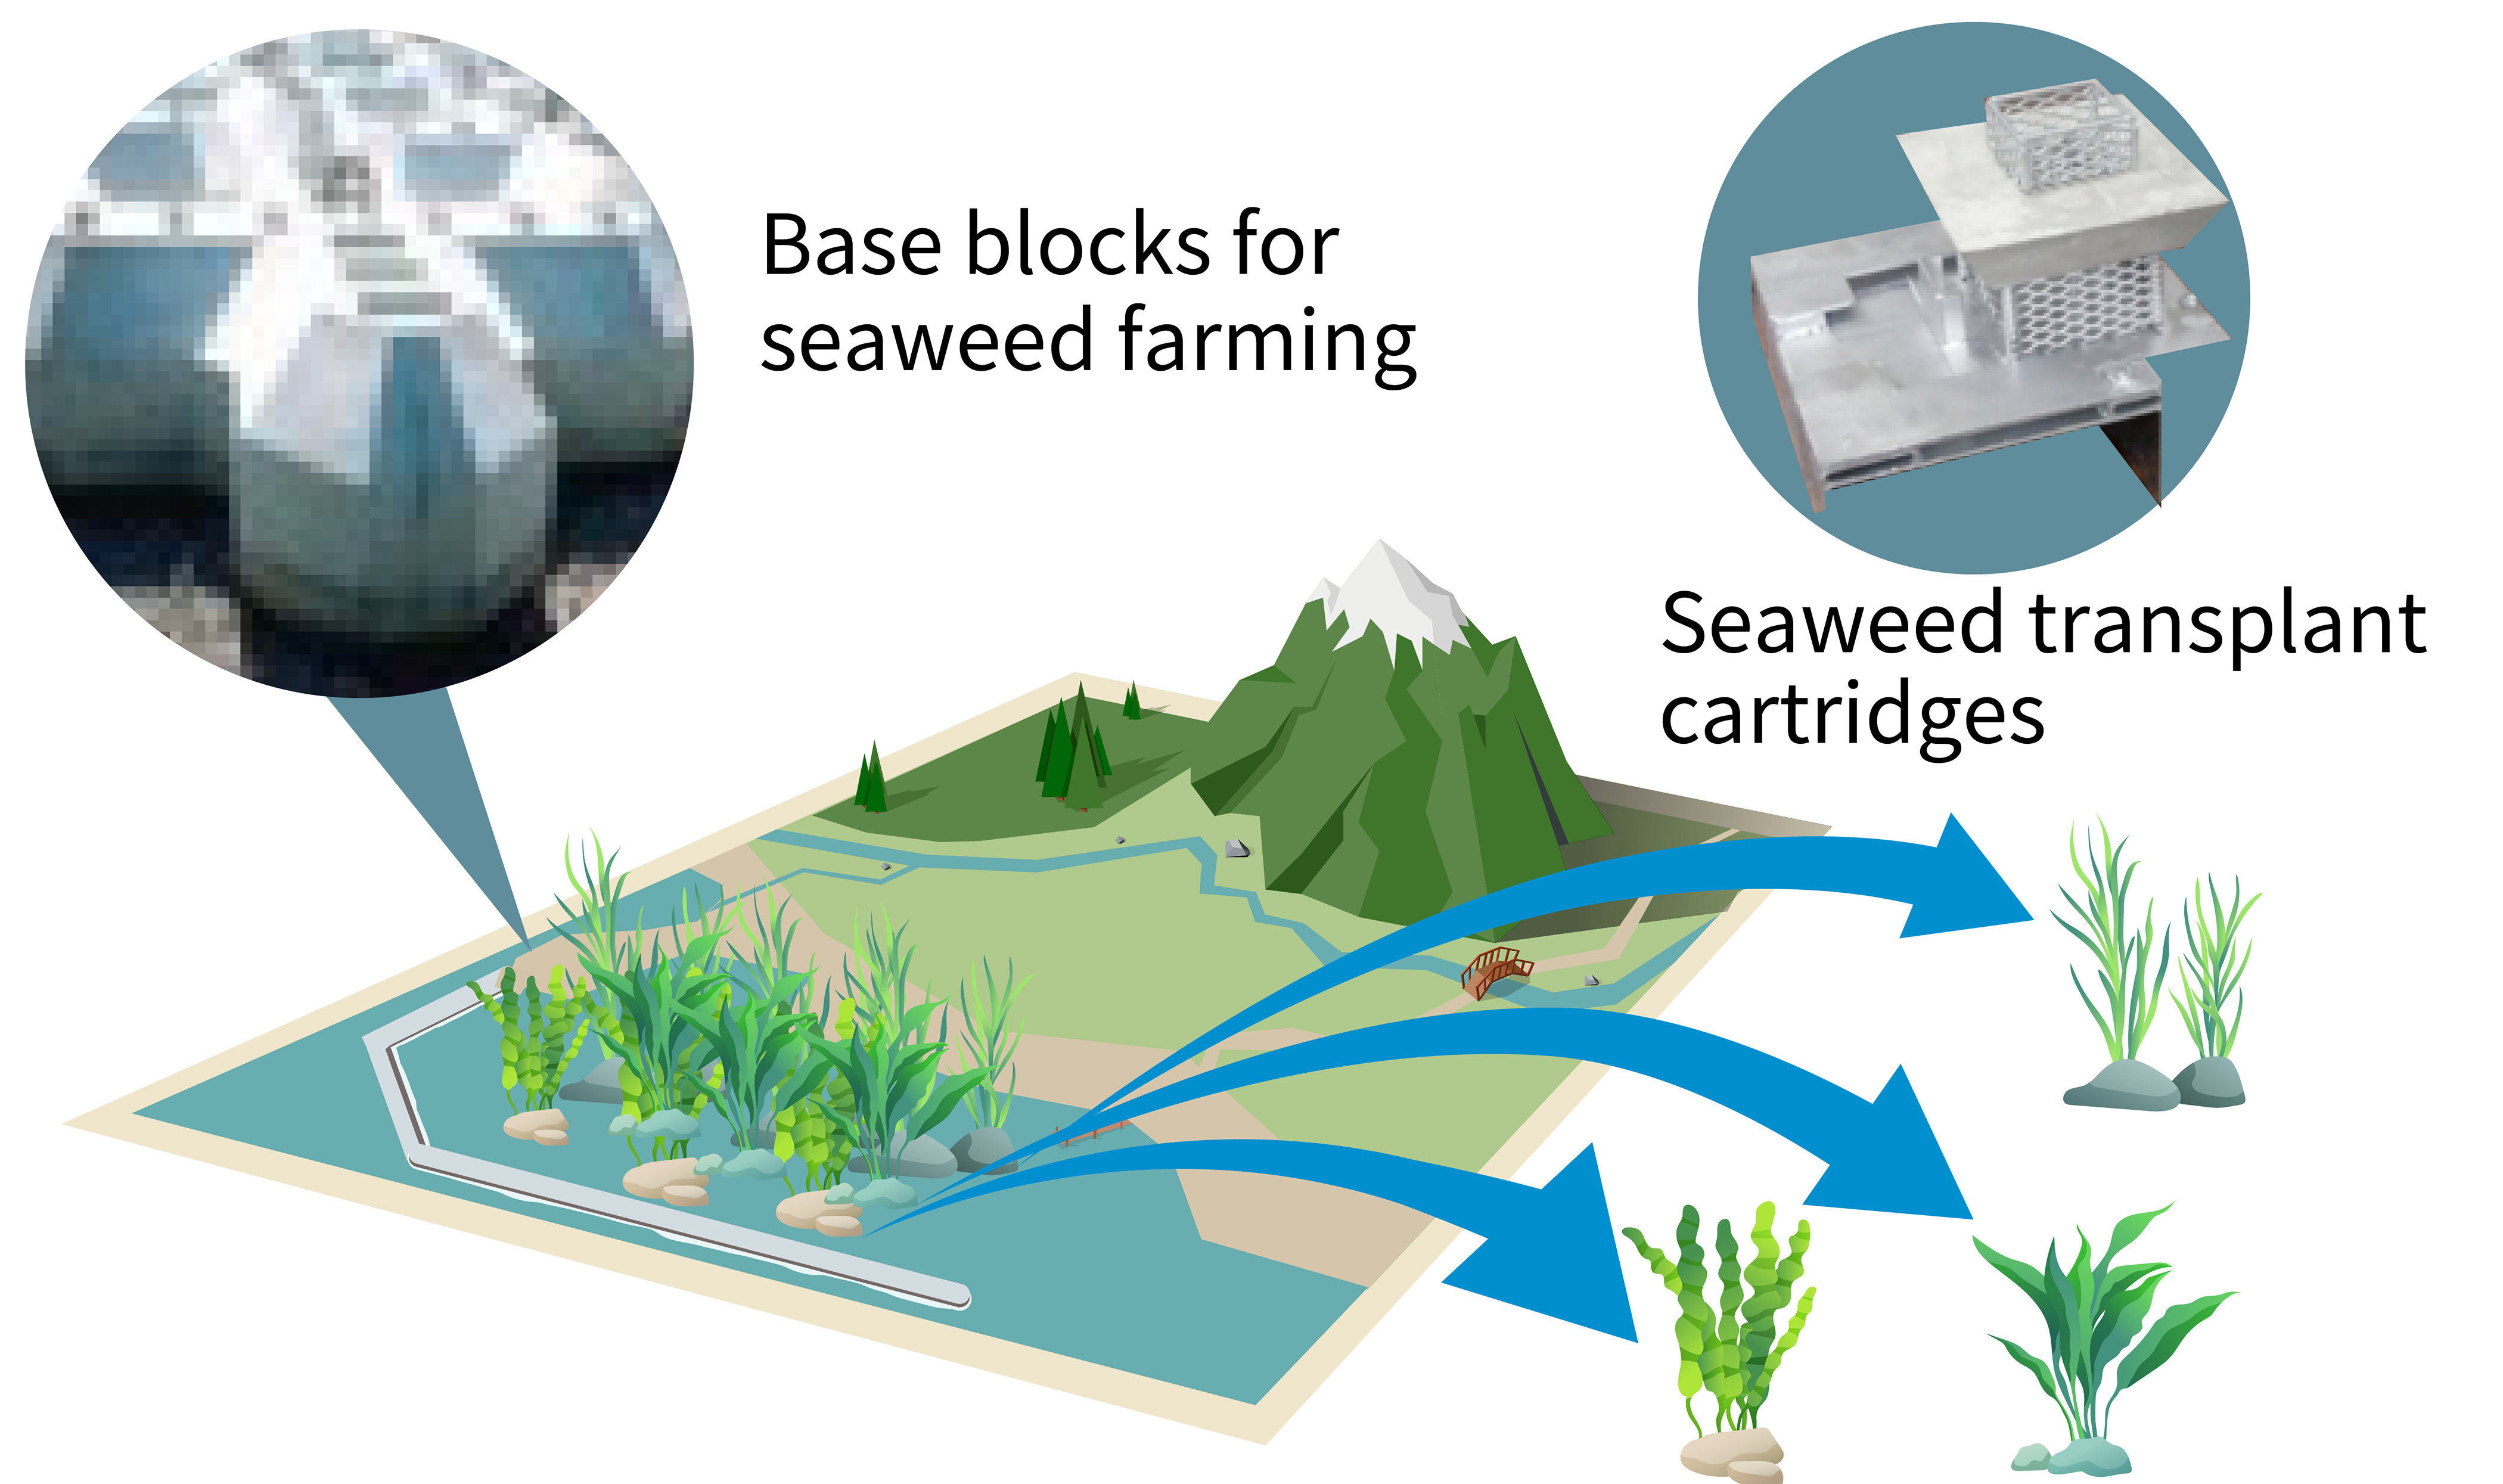 〇 Development of technologies for constructing seaweed beds in support of blue carbon efforts